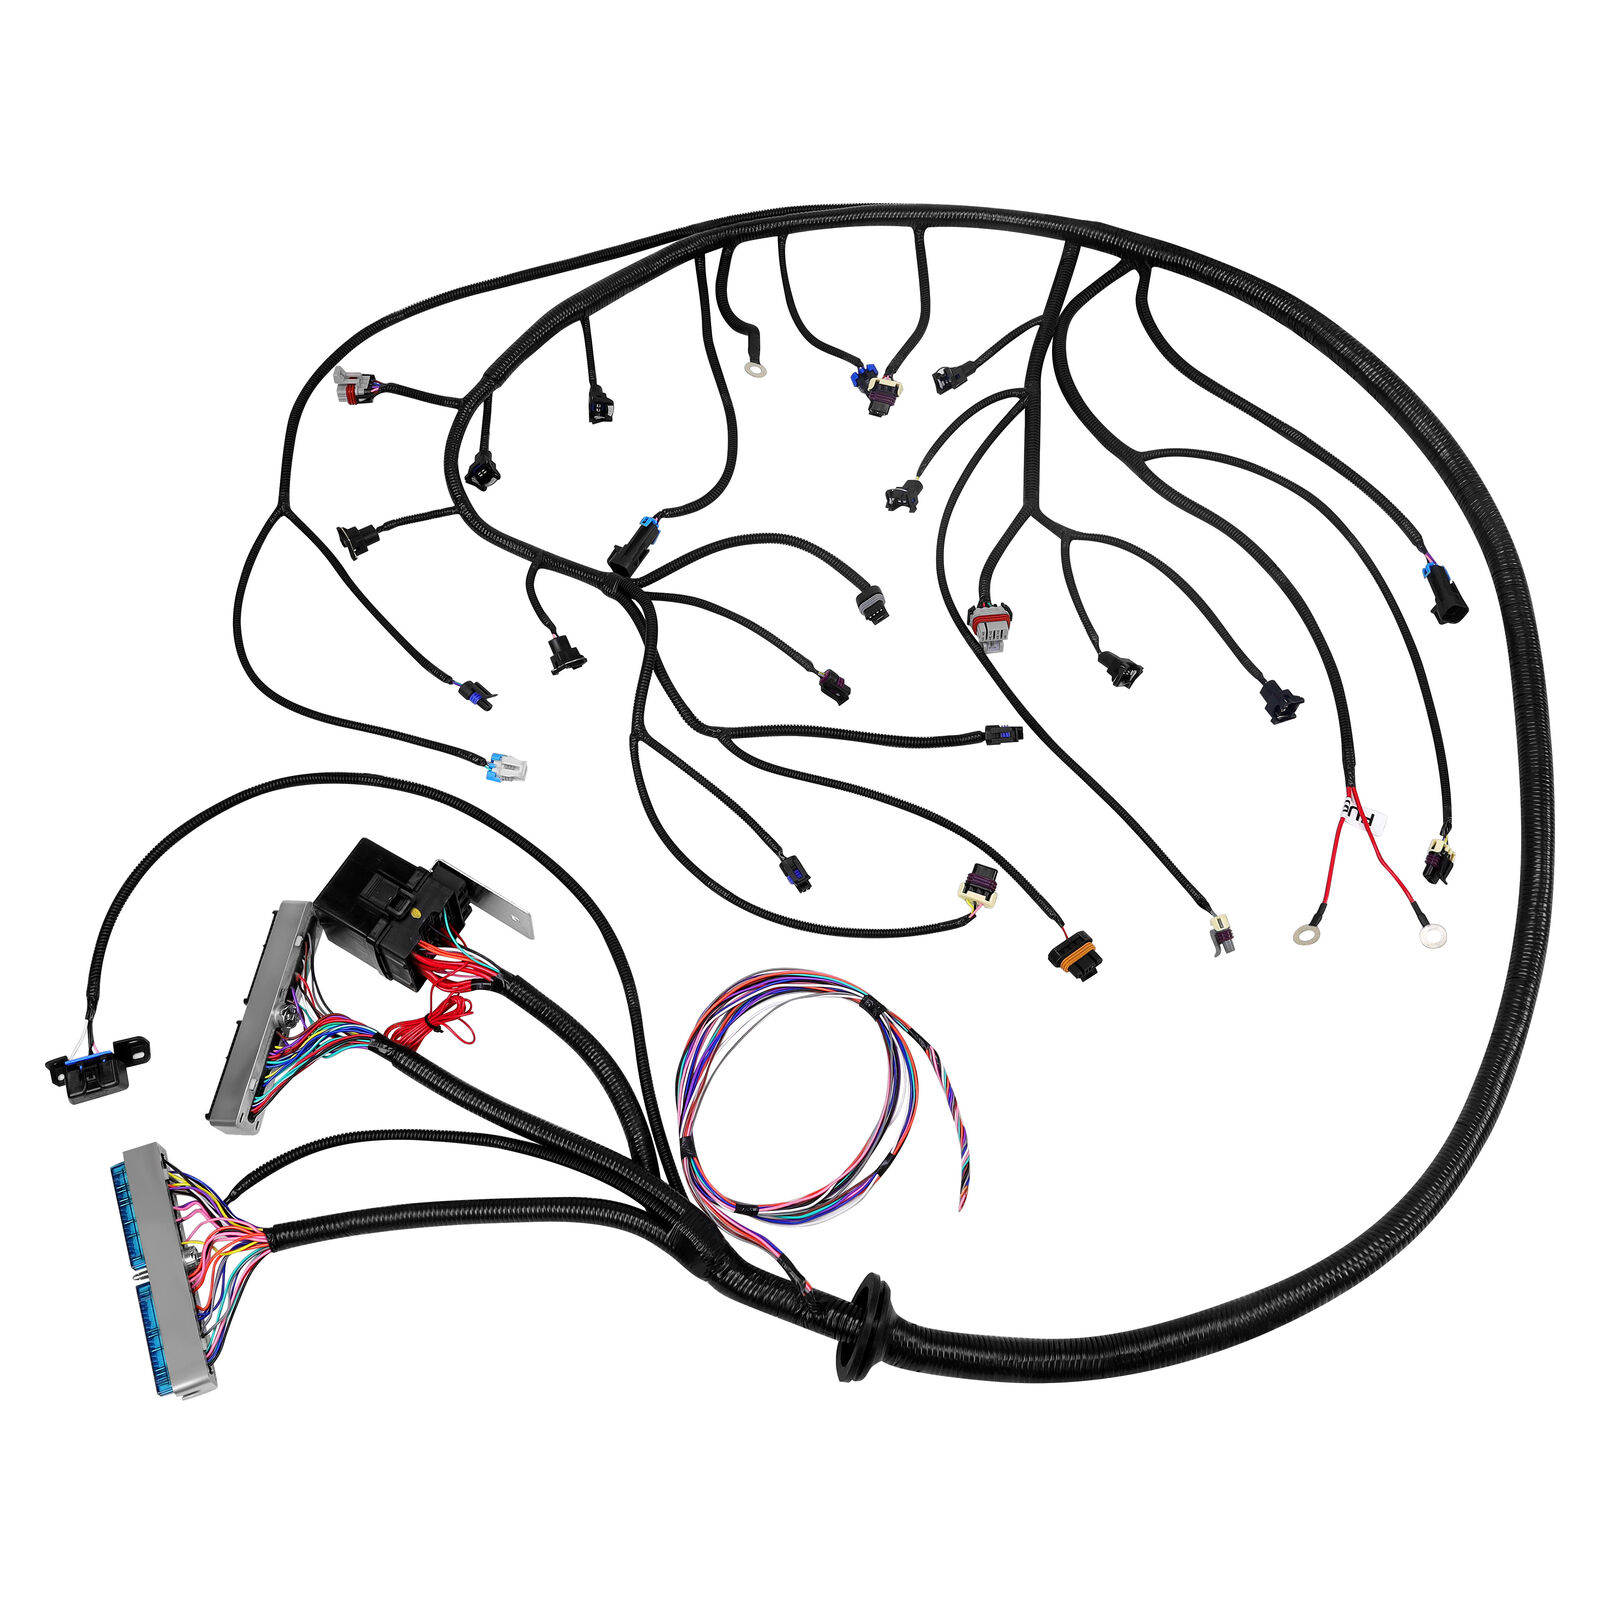 For LS1 97-06 4.8 5.3 6.0 DBC Standalone Wiring Harness T56 or Non-Electric Tran